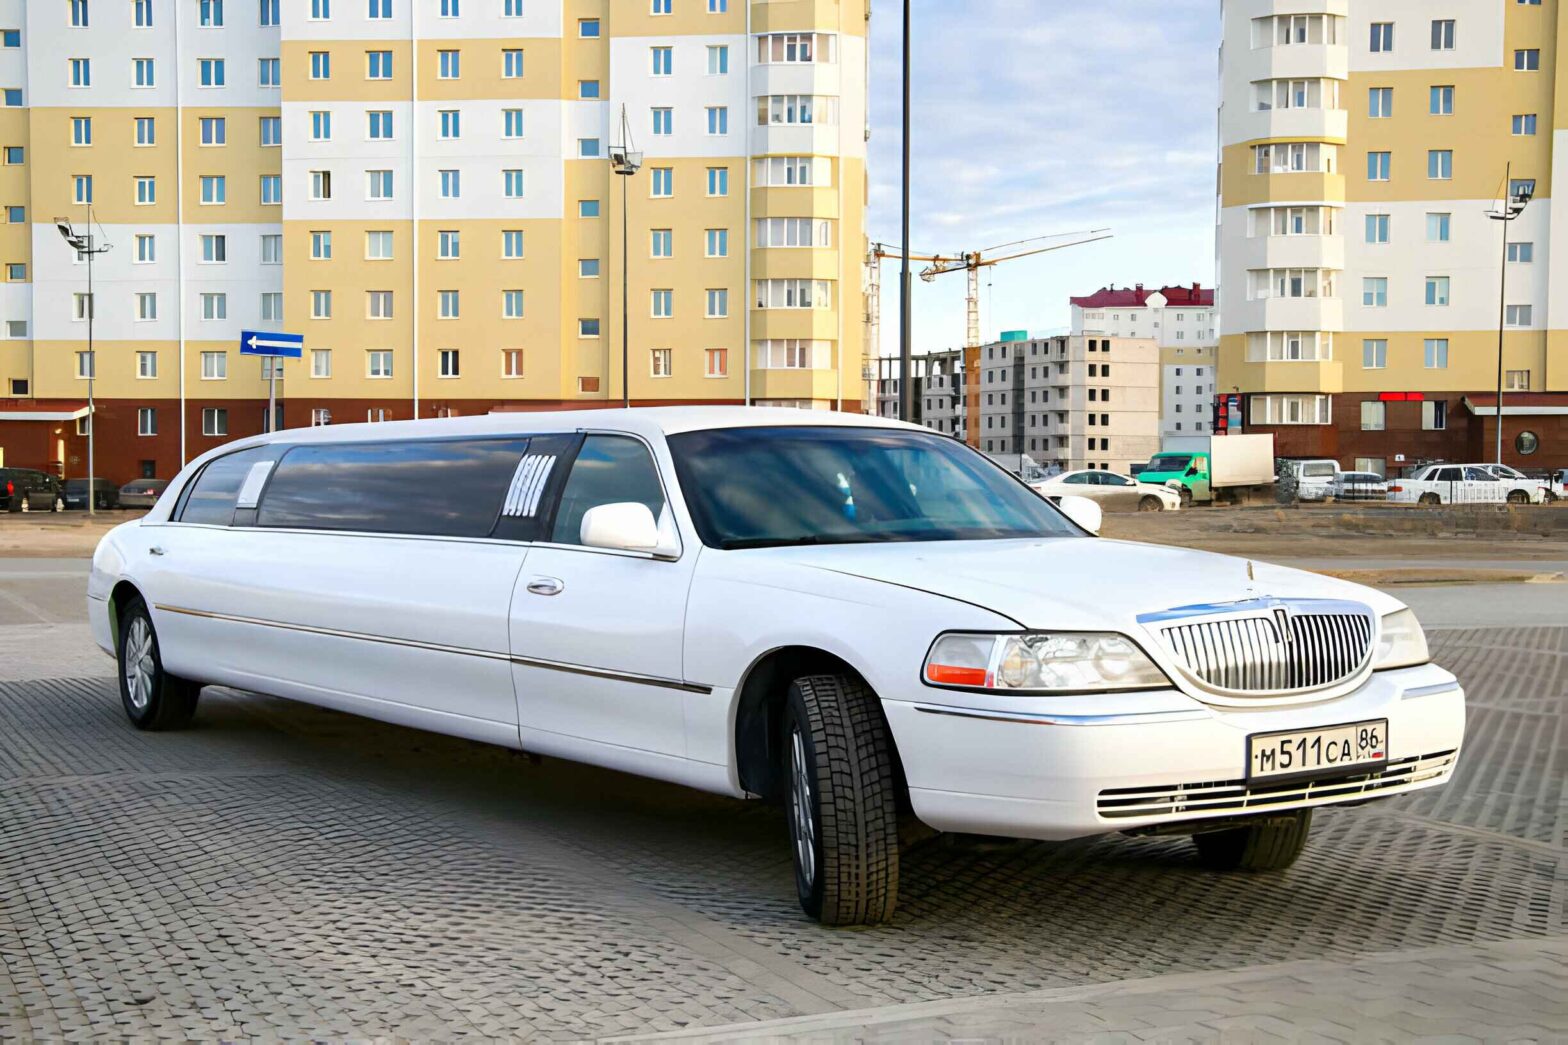 Limo Car Service in Chicago - Ultimate Luxury Travel